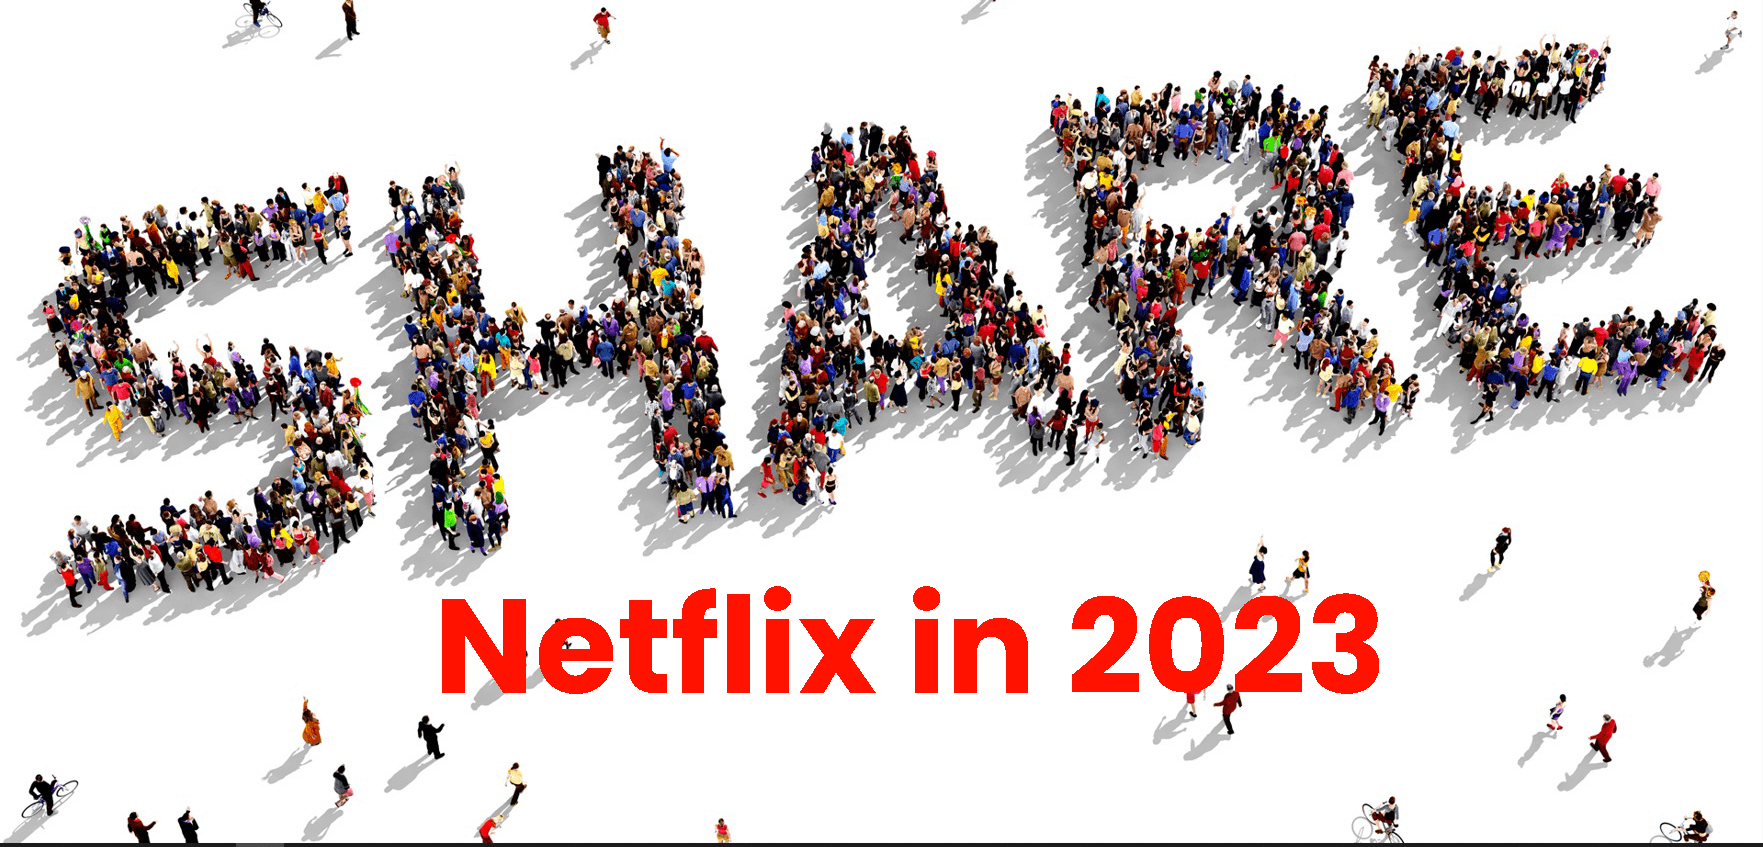 Share your Netflix subscription